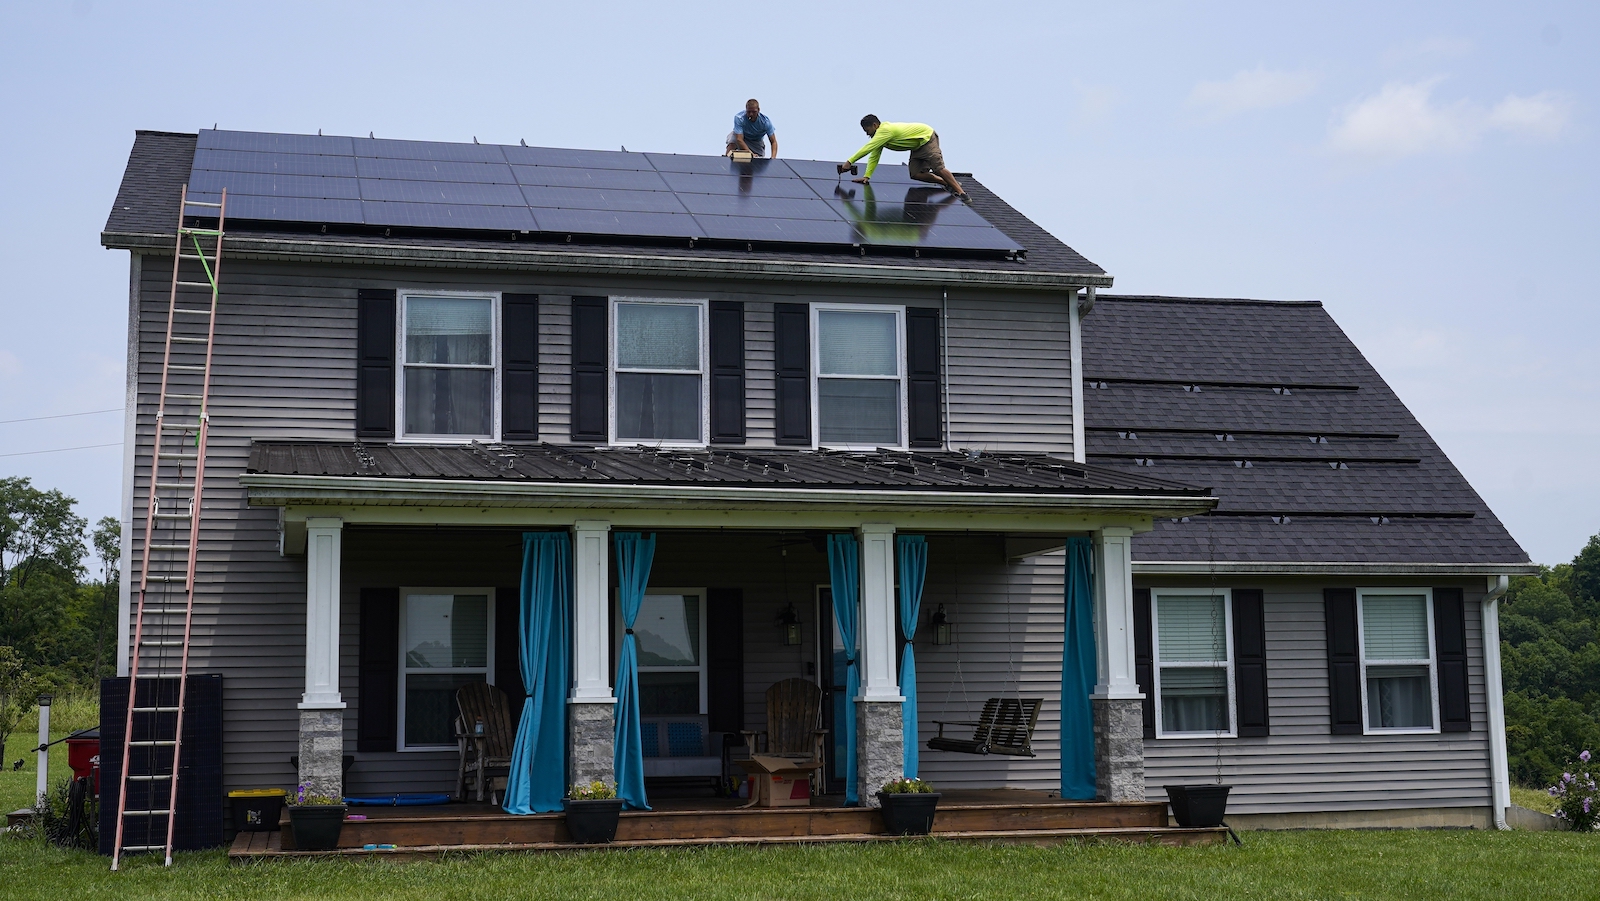 Michigan homeowners associations say yes to rooftop solar panels